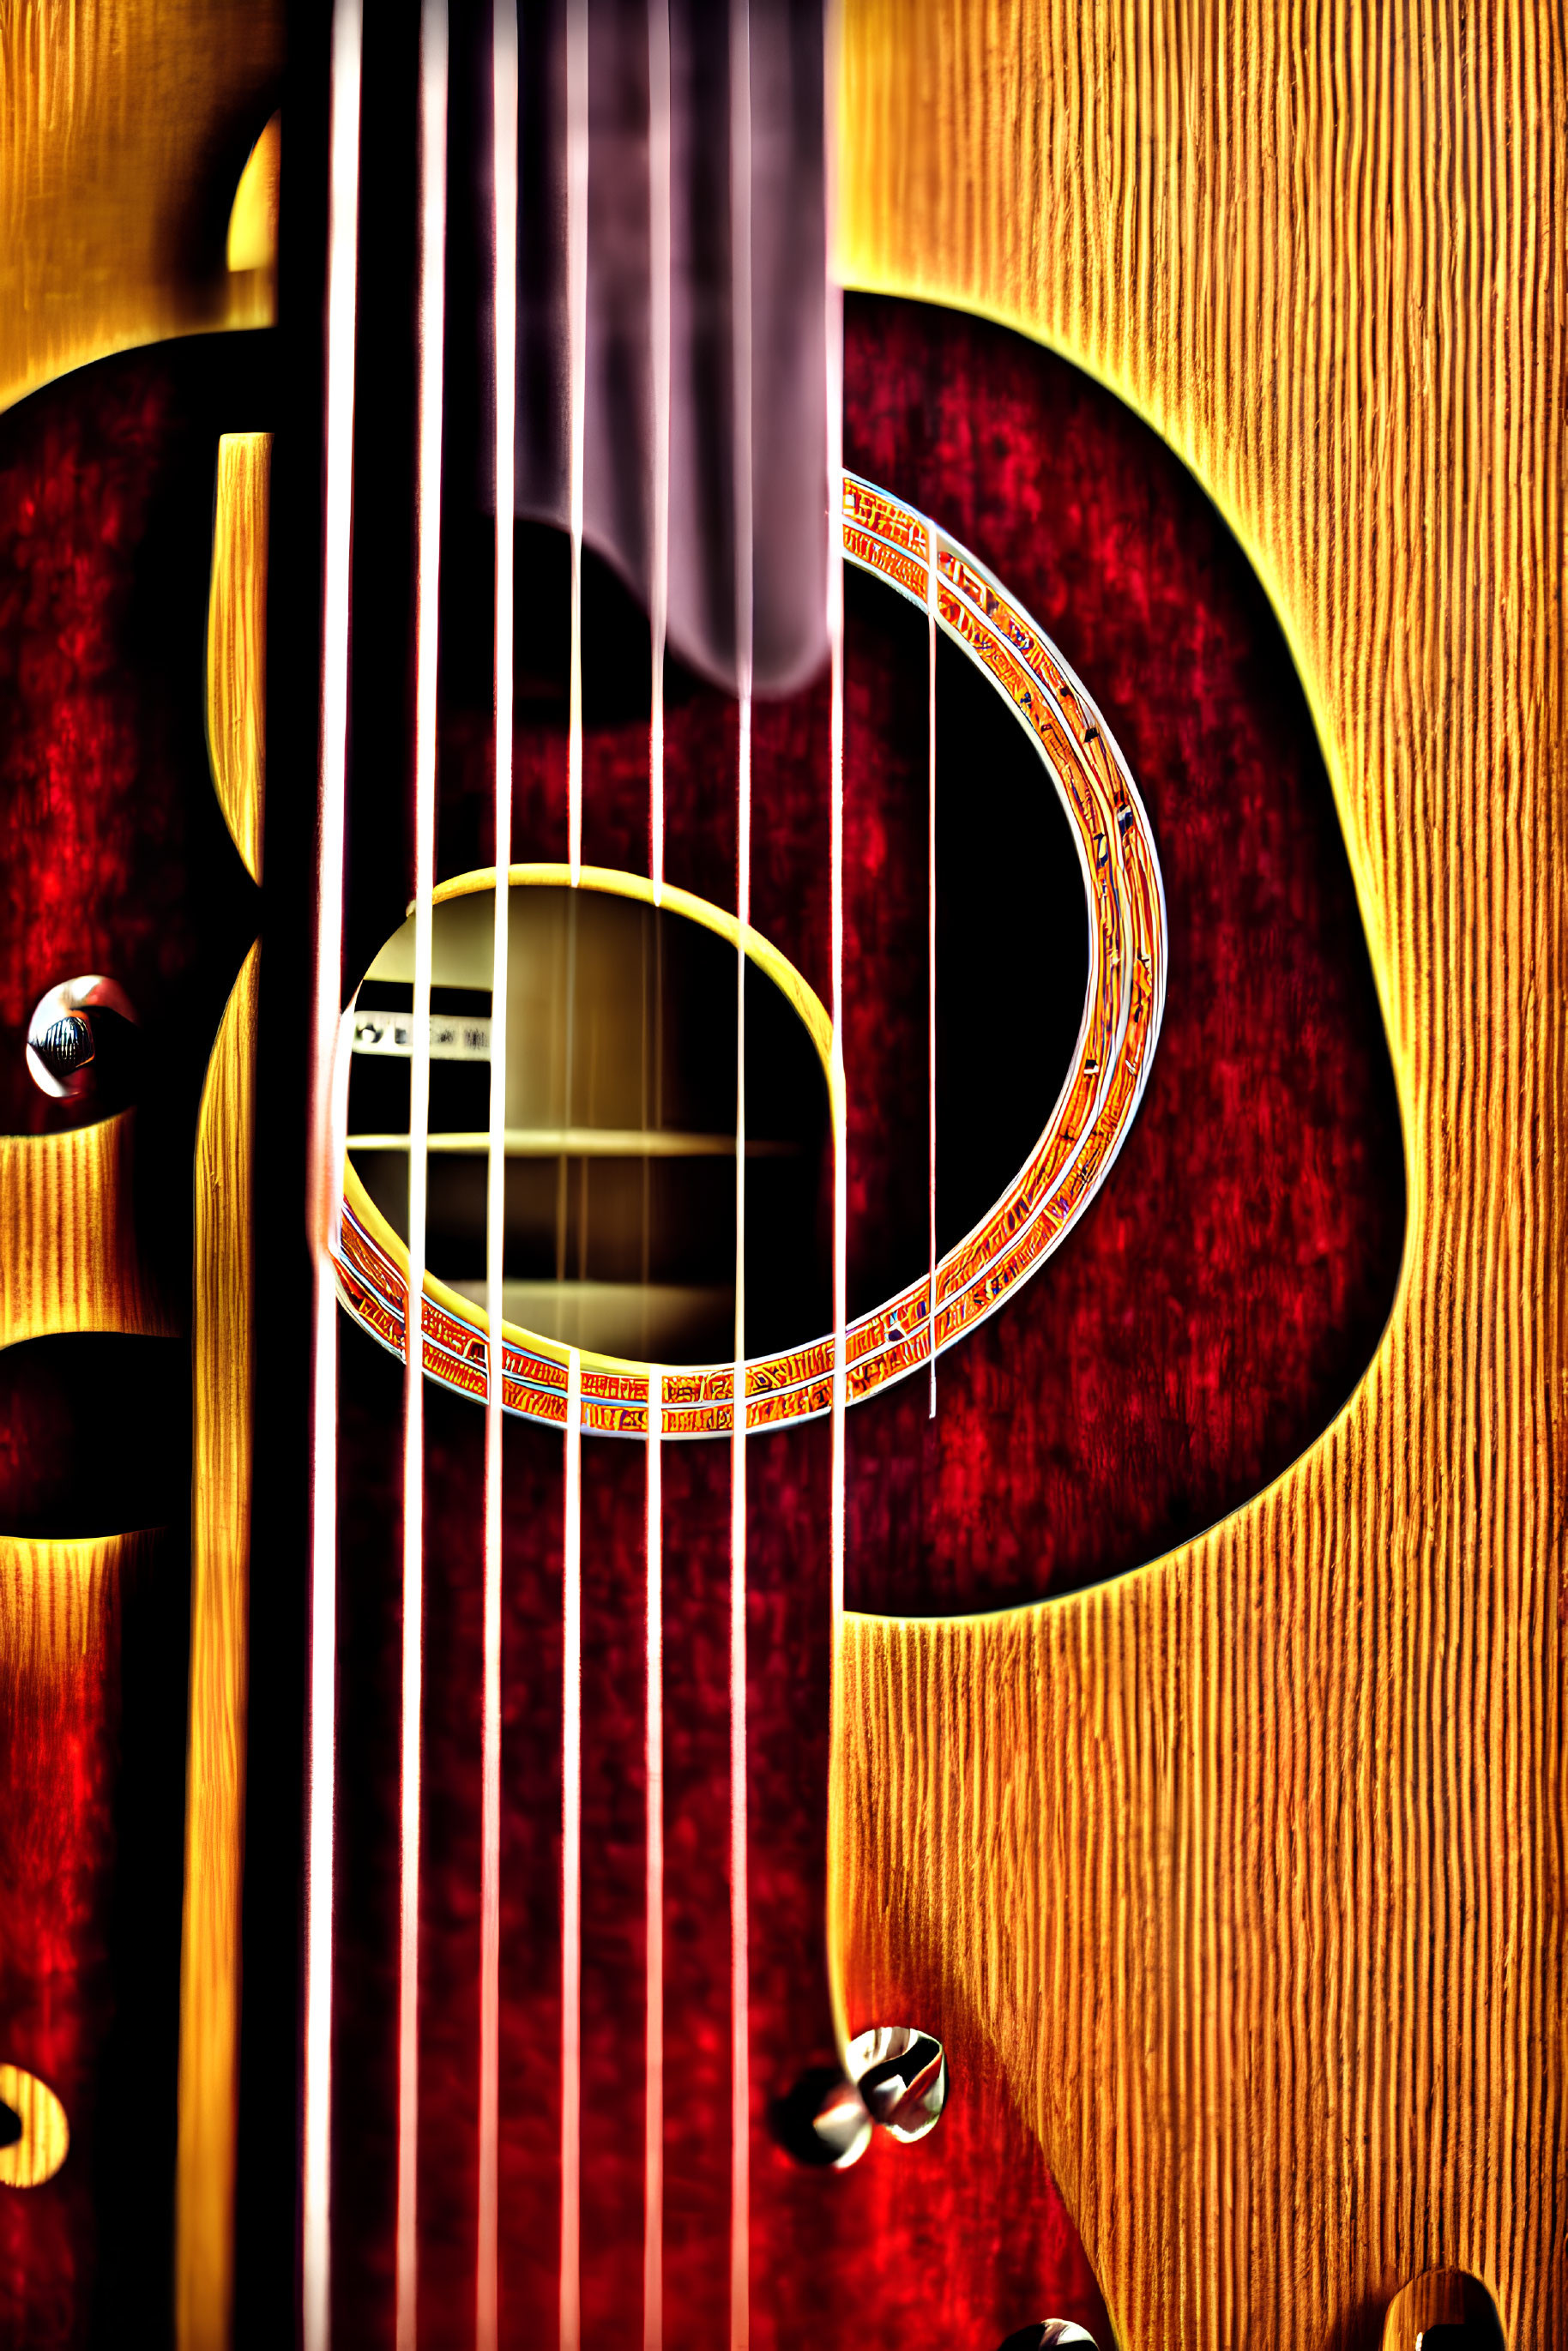 Detailed view of wooden acoustic guitar strings, sound hole, and body in warm golden hue